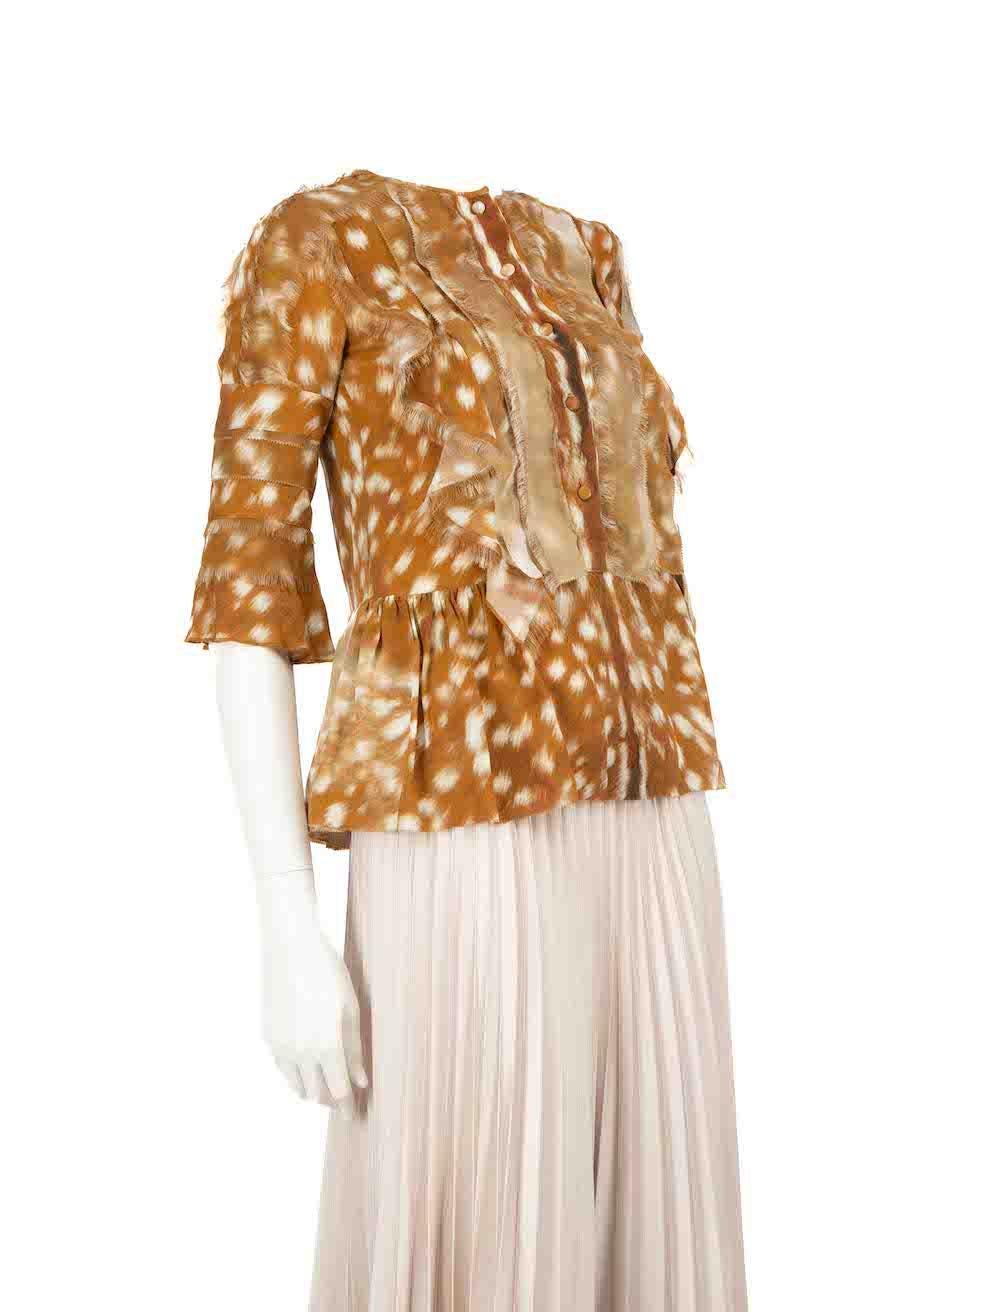 CONDITION is Very good. Minimal wear to blouse is evident. Minimal wear to the blouse is seen with a few pulls to the weave on this used Burberry designer resale item.
 
 
 
 Details
 
 
 Brown
 
 Silk
 
 Mid sleeve blouse
 
 Animal print pattern
 
